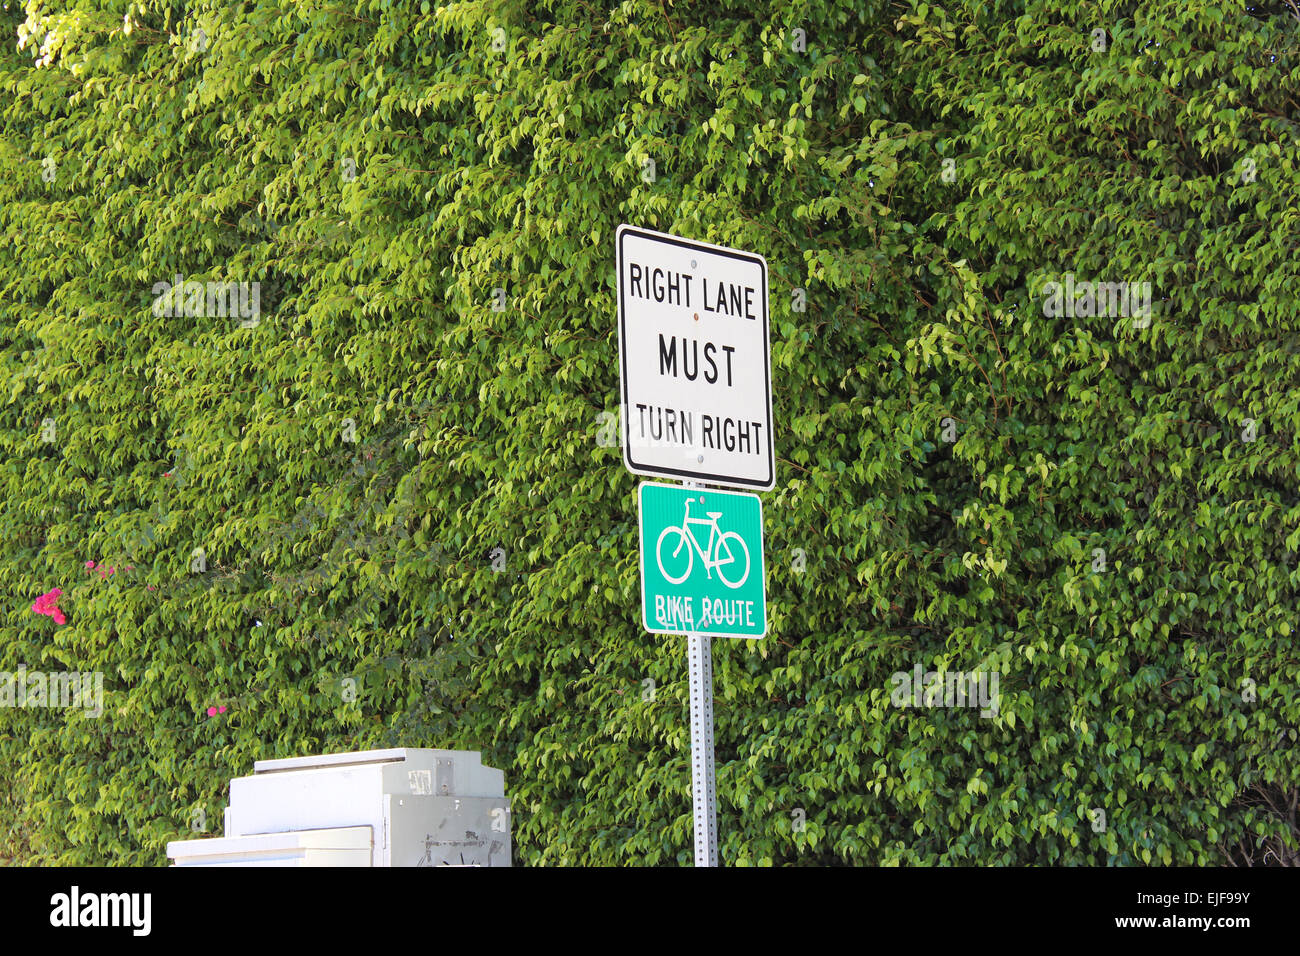 Highway code - Right Lane Must Turn Right. Bike Route. Road sign in California, USA Stock Photo